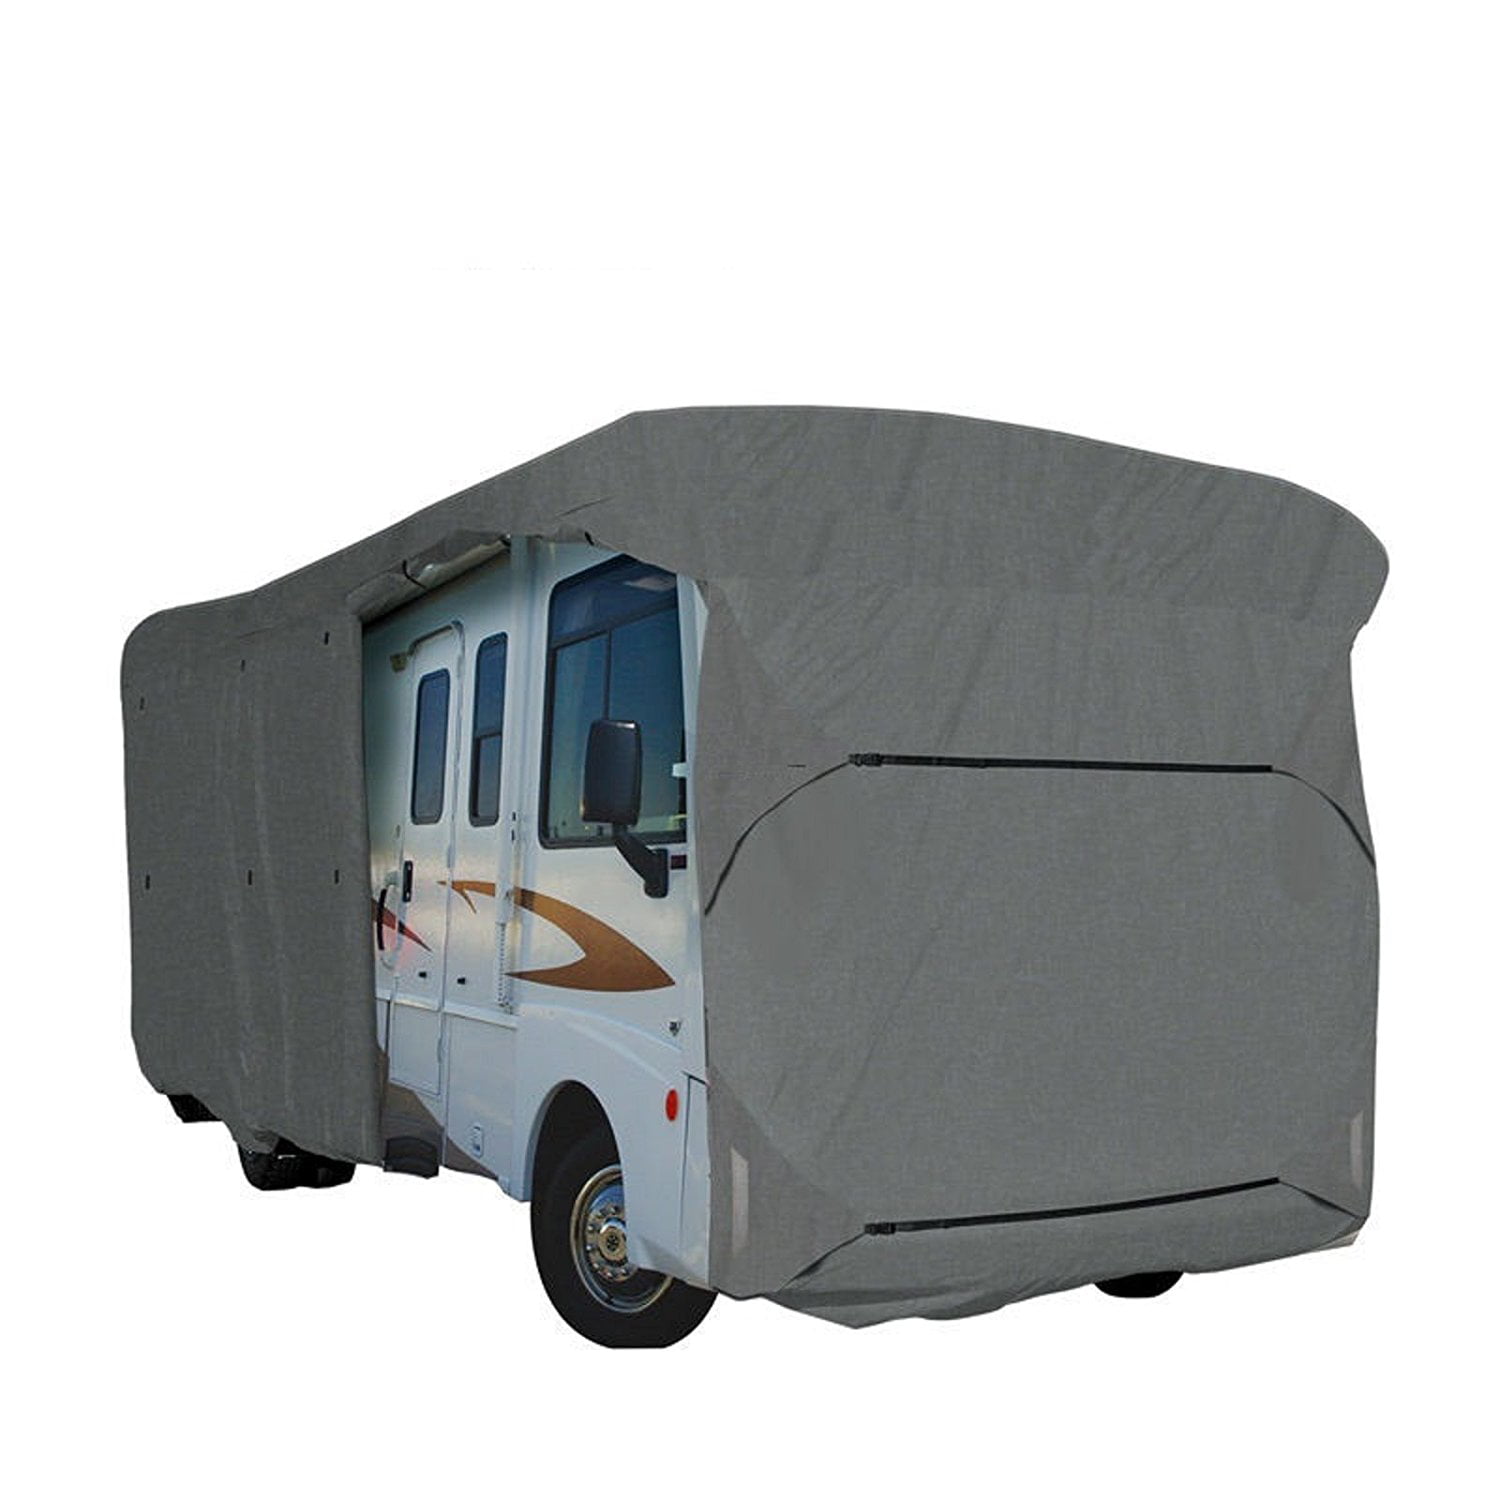 Thor Miramar 35.3 Deluxe 4-Layer Class A RV Motorhome Storage Cover 